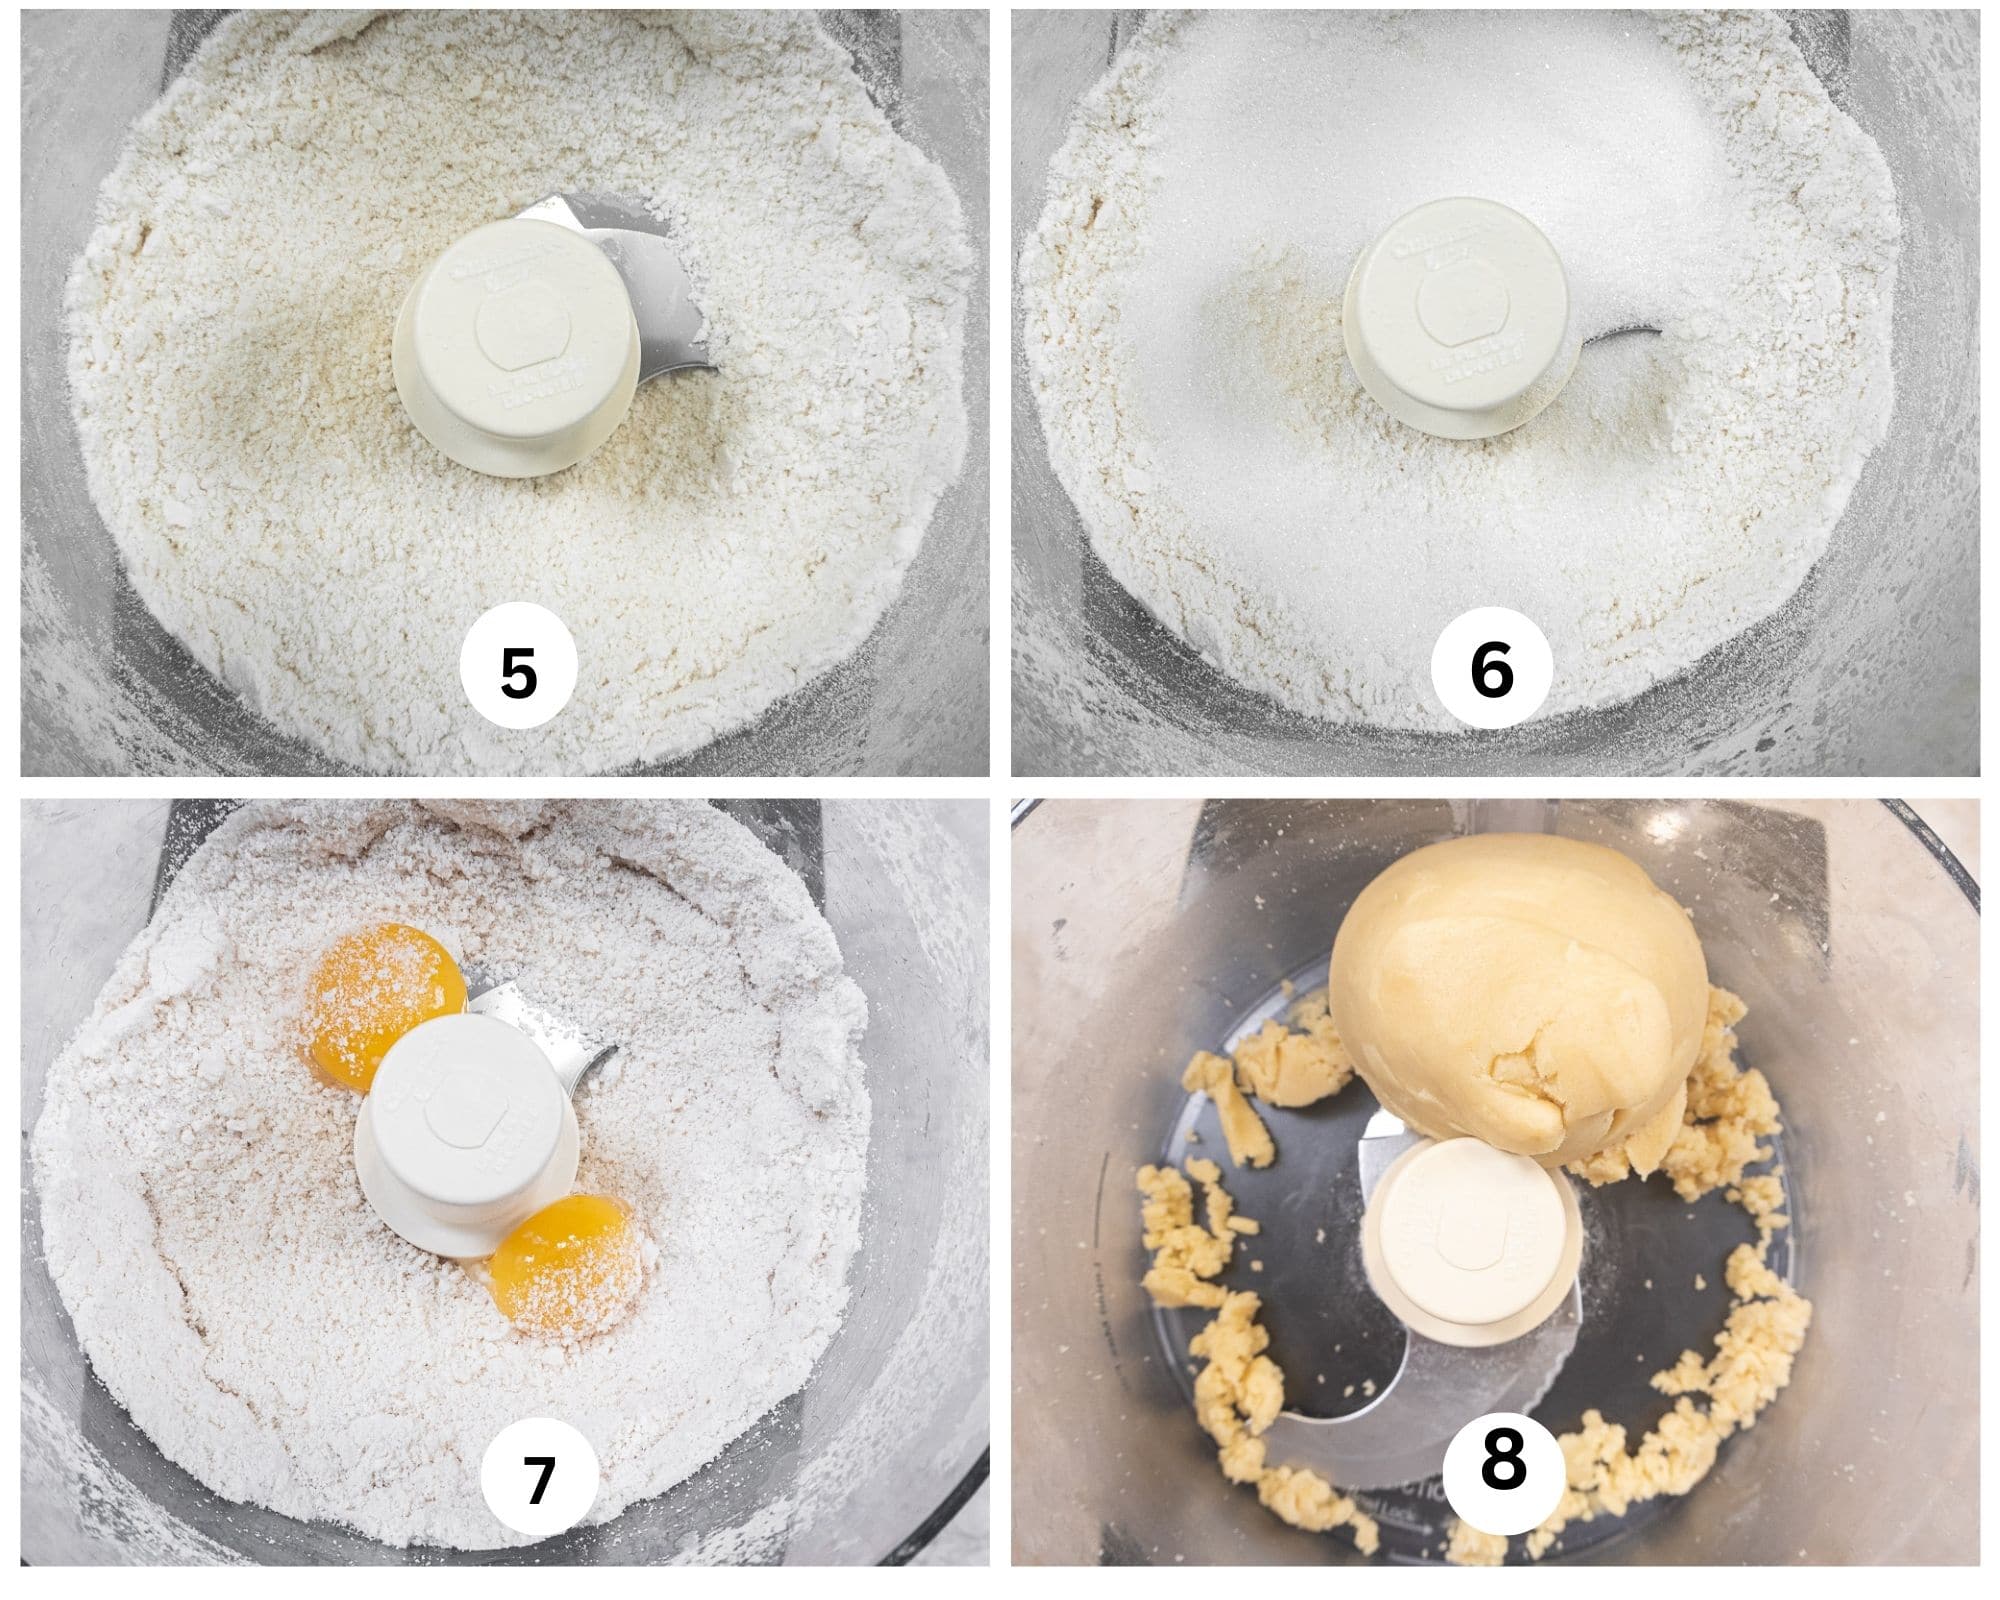 The second collage shows the butter being cut into the flour, the sugar added to the processor followed by the egg yolk and the pastry balling up after processing.